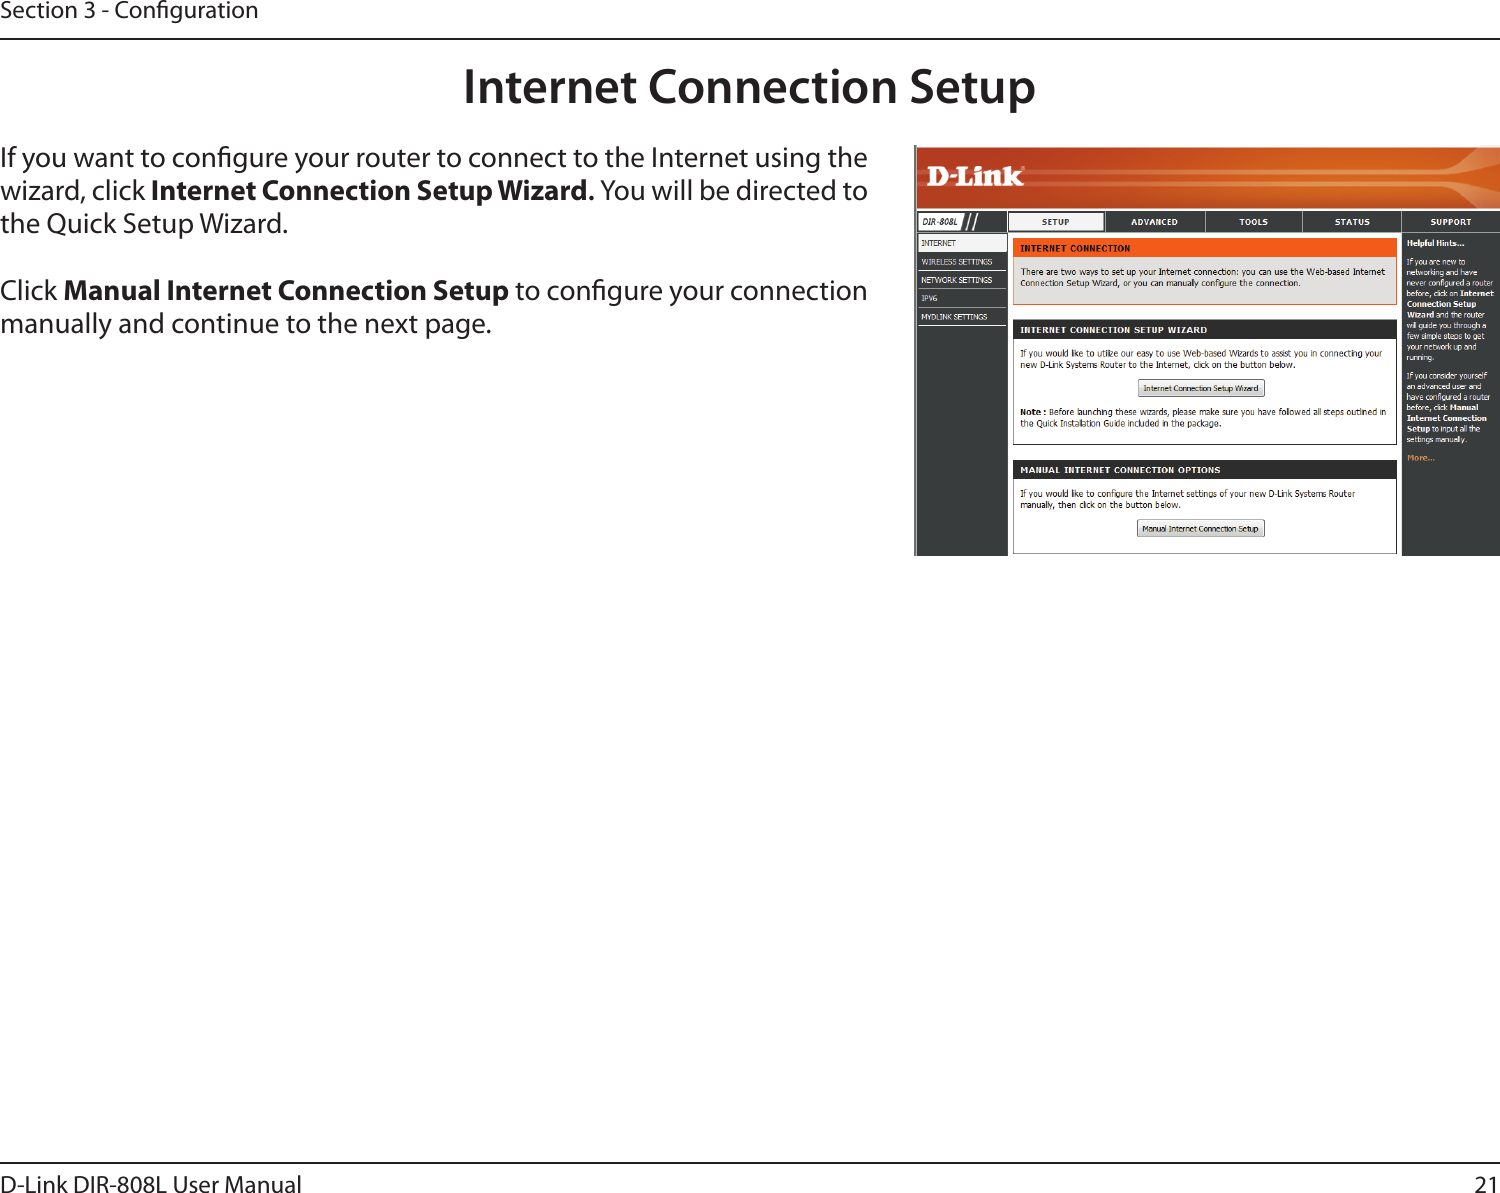 21D-Link DIR-808L User ManualSection 3 - CongurationInternet Connection SetupIf you want to congure your router to connect to the Internet using the wizard, click Internet Connection Setup Wizard. You will be directed to the Quick Setup Wizard. Click Manual Internet Connection Setup to congure your connection manually and continue to the next page.